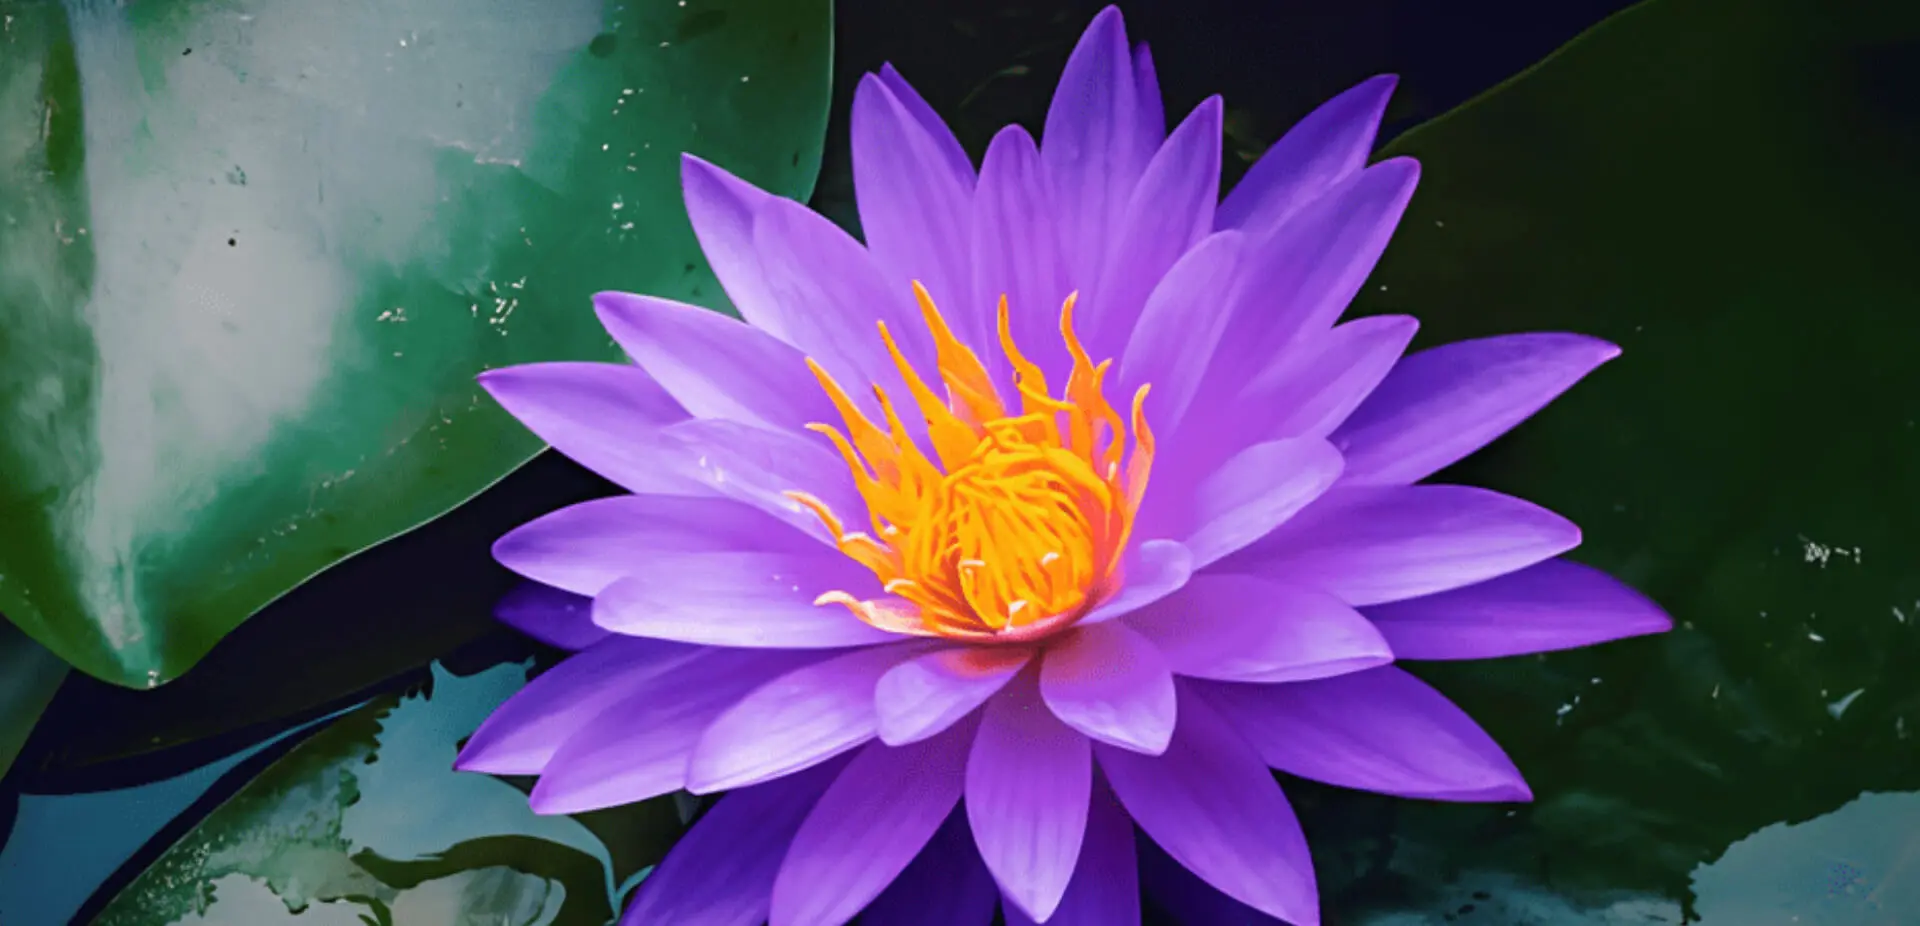 A purple water lily with yellow center in pond.